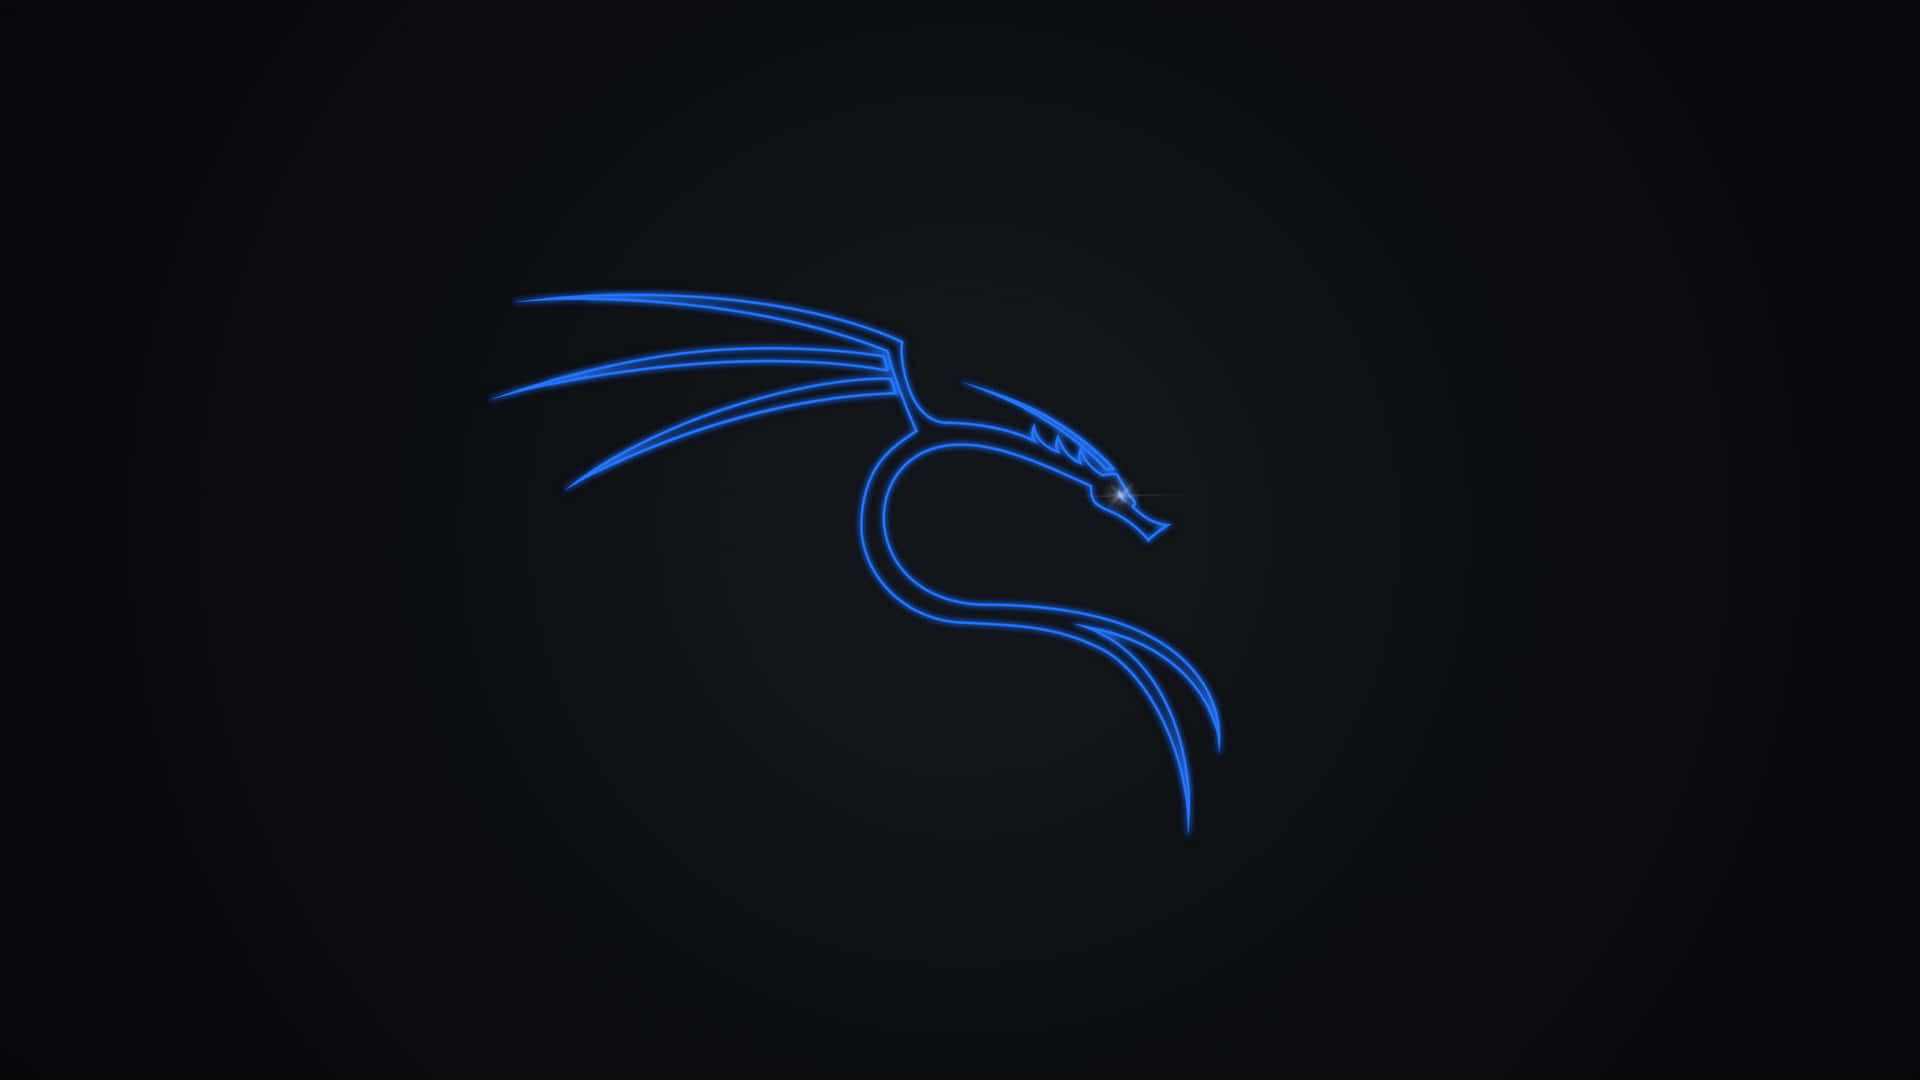 Kali Linux: The Preferred Choice For Ethical Hackers